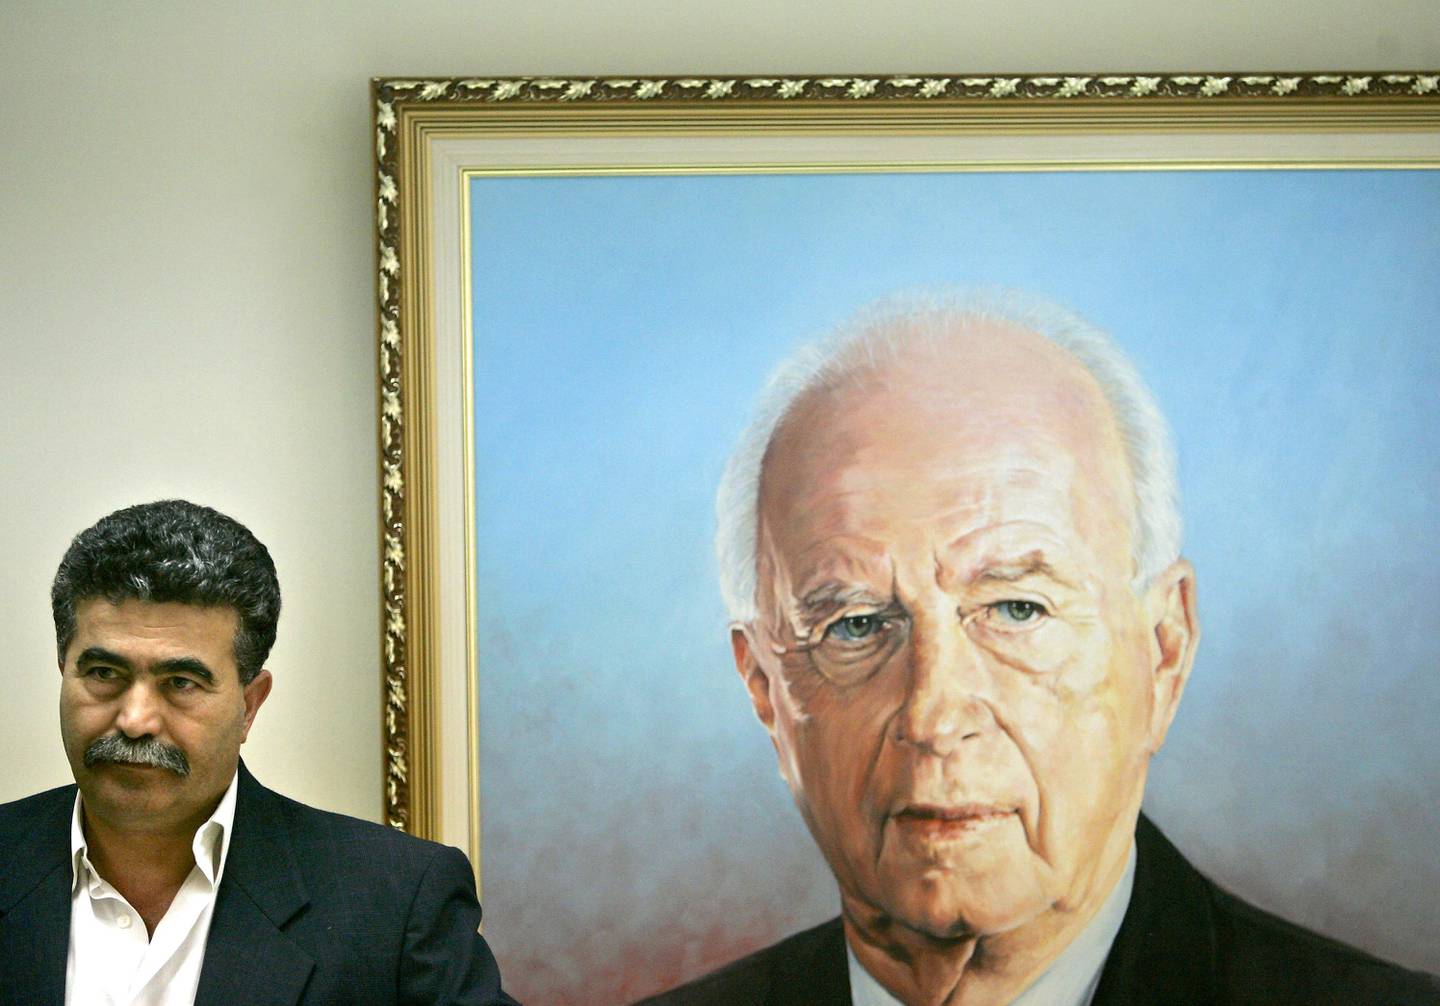 Israeli Labor Party leader Amir Peretz stands in front of a painting showing the late Prime Minister and Labor leader Yitzhak Rabin, during the weekly meeting at the Knesset in Jerusalem, Monday, Dec. 12, 2005. According to the latest polls, the Labor Party would take 23 seats of 120 seats in parliament in the upcoming March elections, Ariel Sharon's new Kadima Party would capture 39, and Likud, the hard-line party that Ariel Sharon recently quit, 13. Amir Peretz is campaigning on a platform of social and economic issues and is perceived as being inexperienced with security matters. (AP Photo/Kevin Frayer)